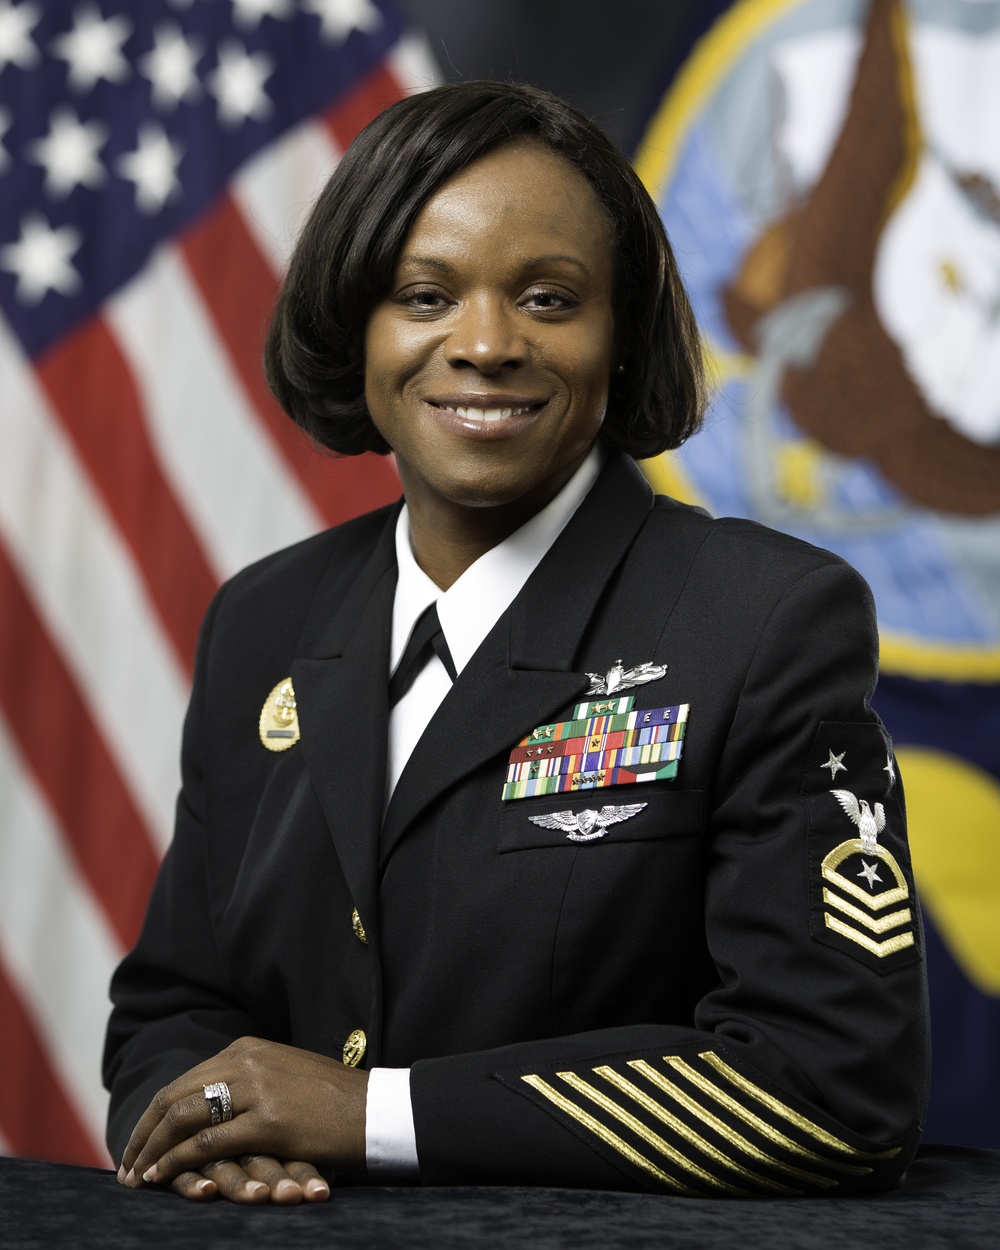 Official portrait of Command Master Chief, Naval Support Activity Mid-South, Command Master Chief Marilyn E. Kennard, US Navy